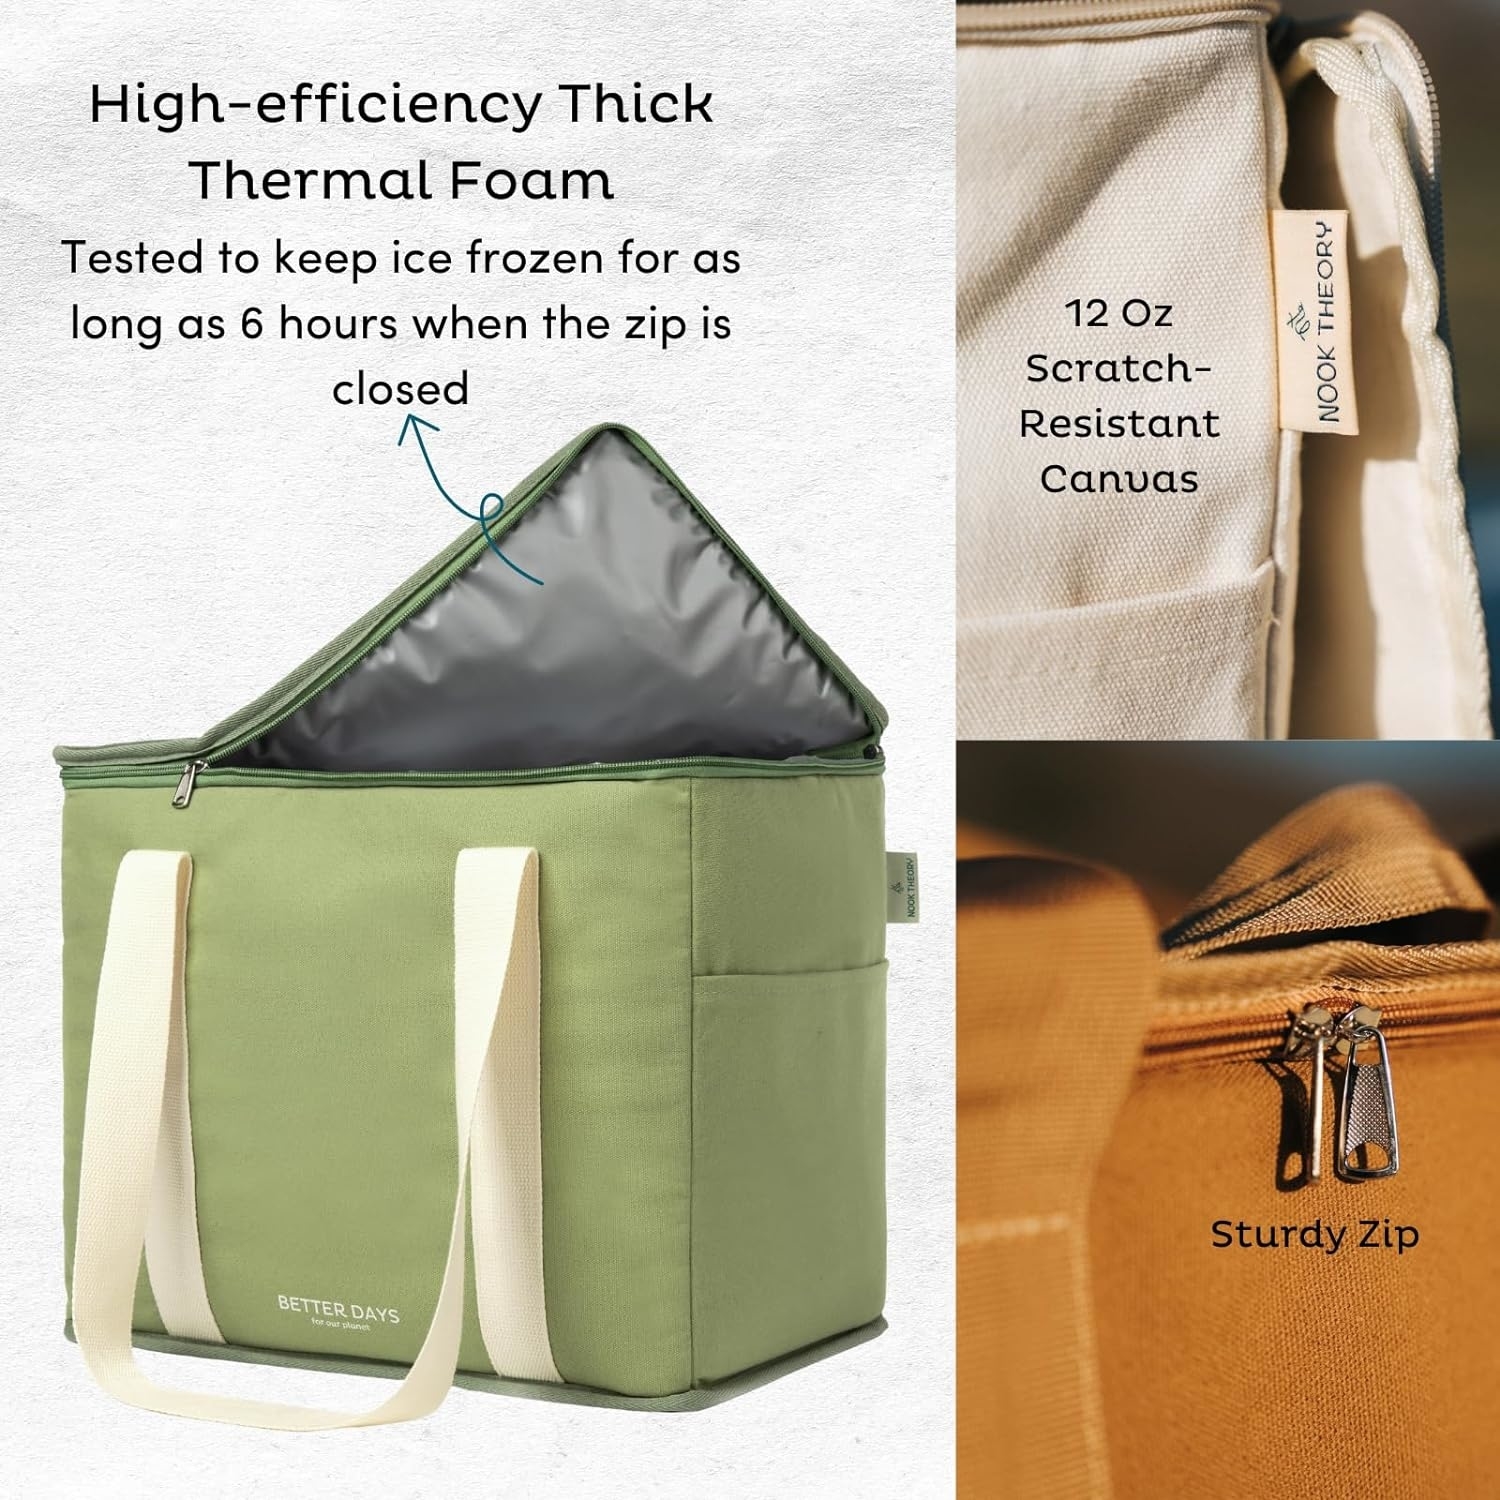 Reusable insulated grocery bag showing high efficiency thick thermal foam, sturdy zip, and more features.